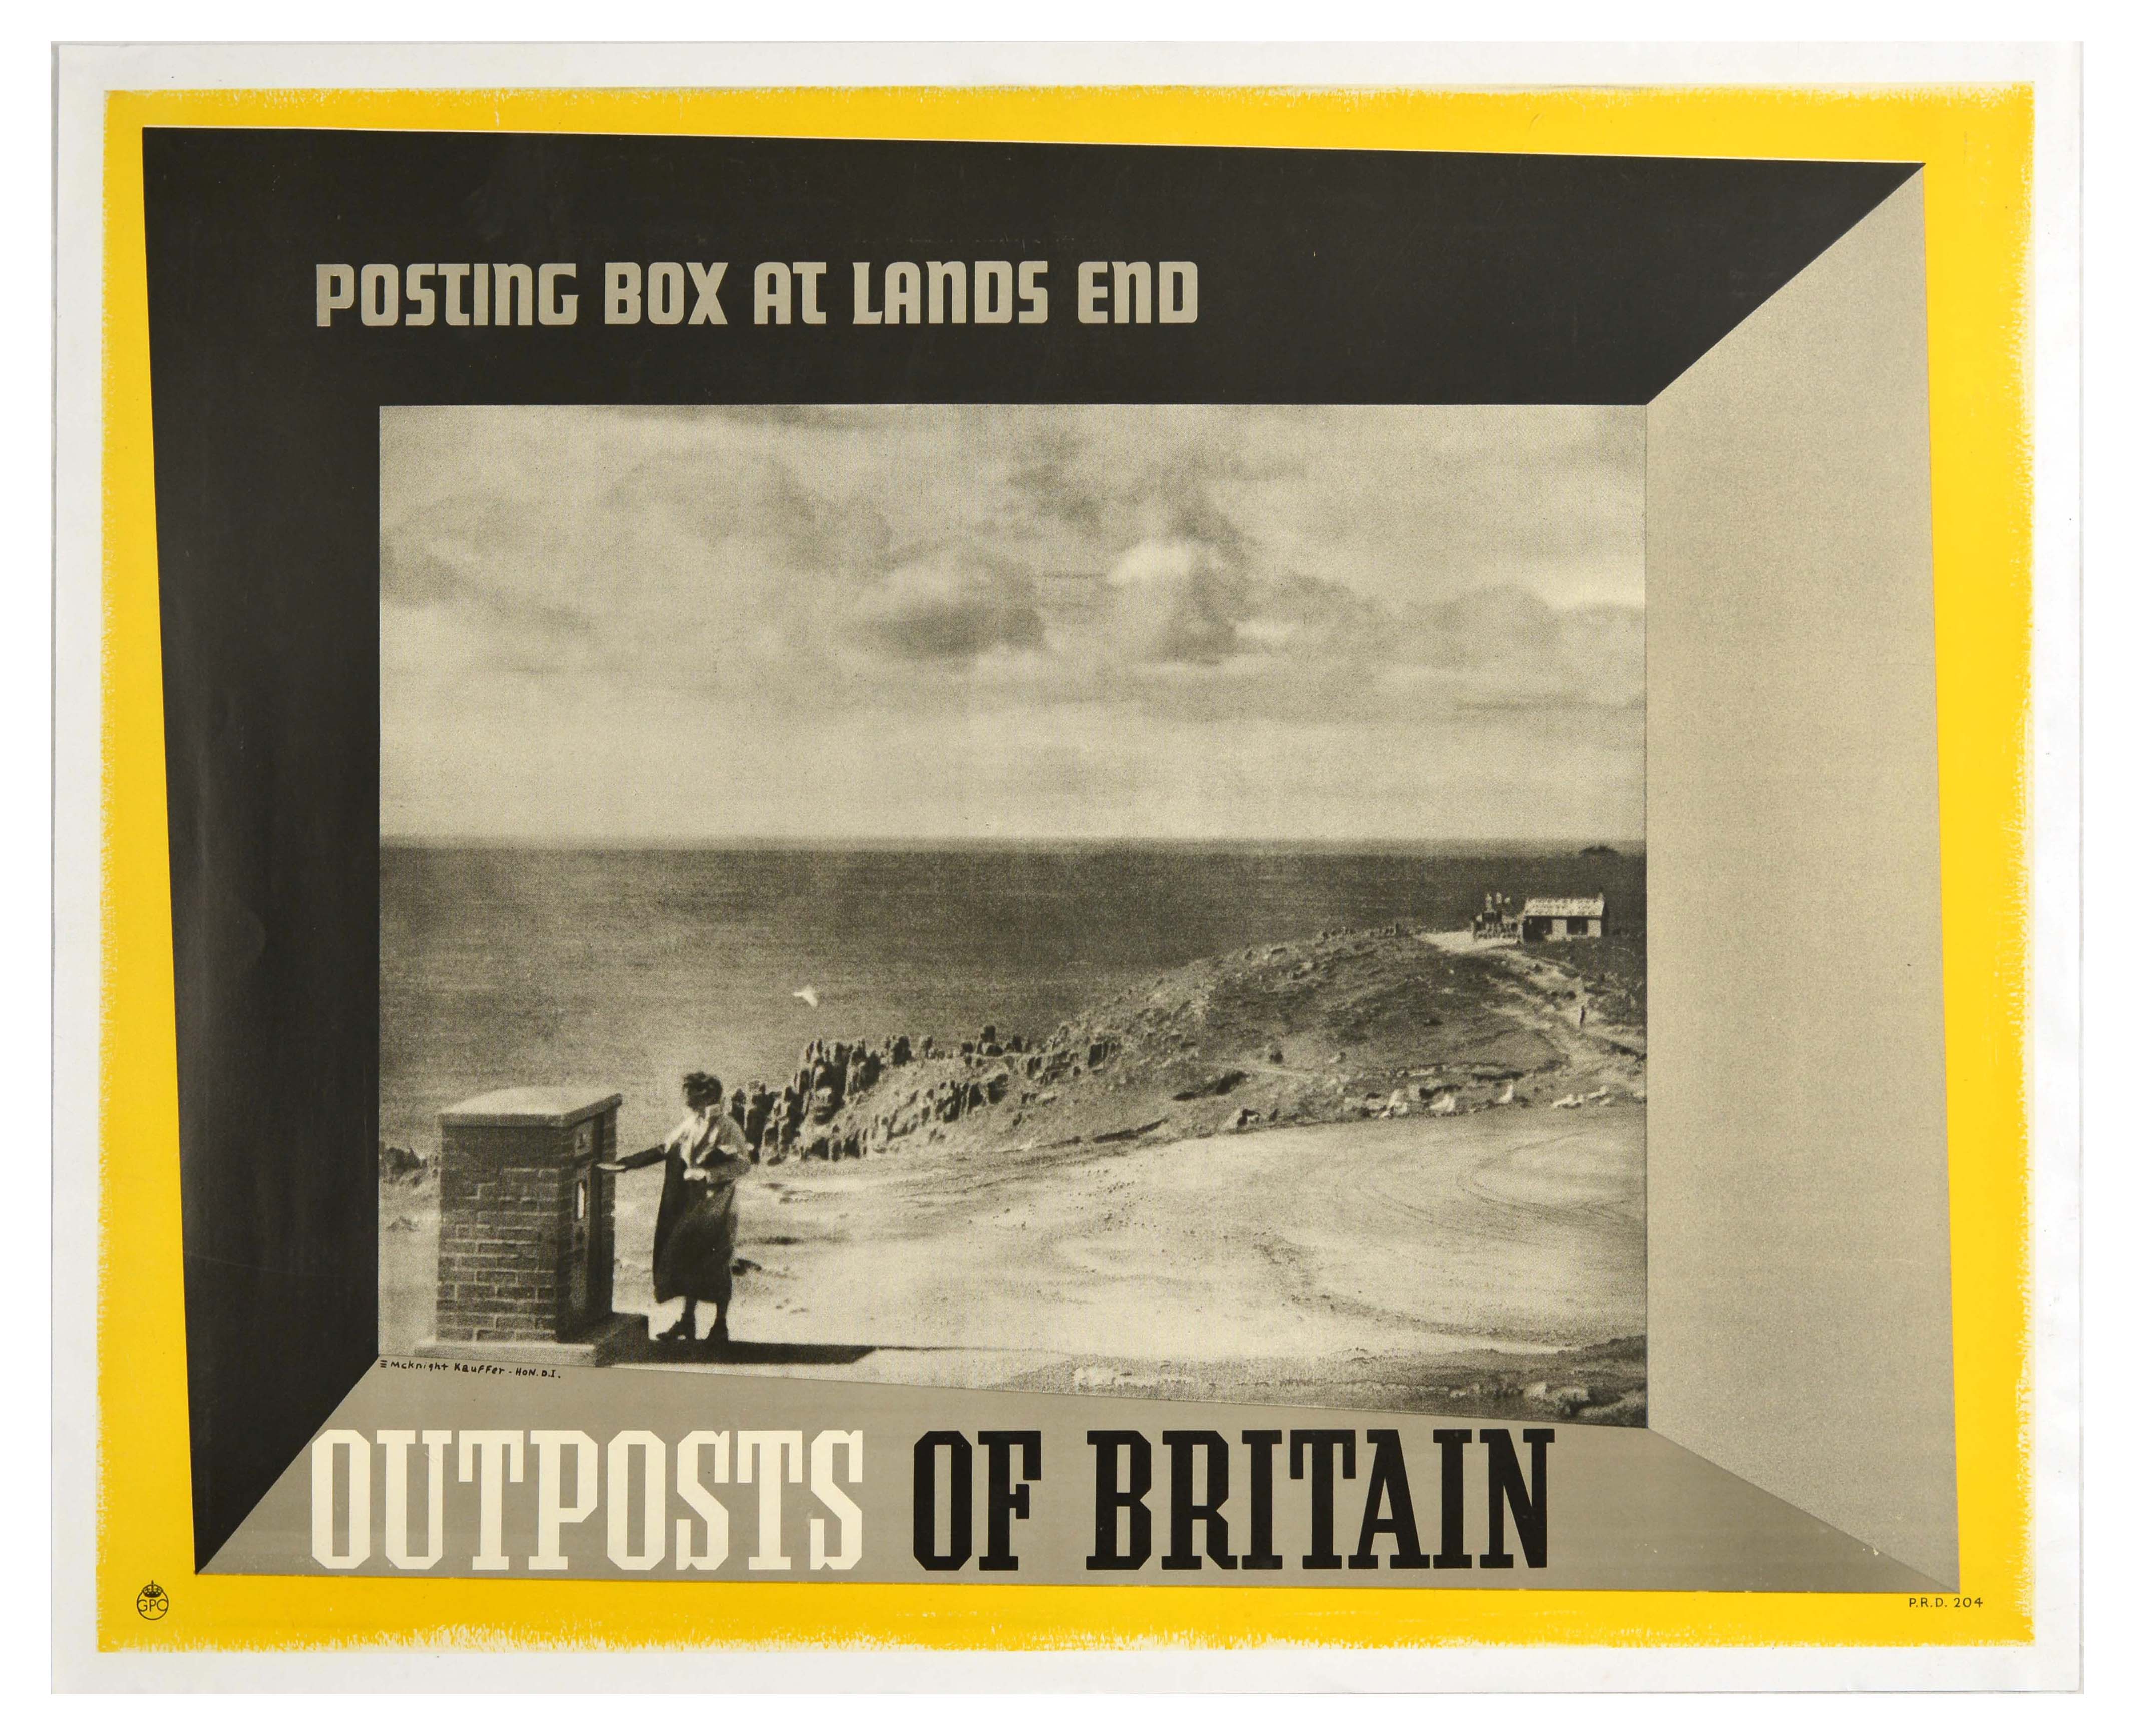 Advertising Poster Outposts of Britain Lands End GPO McKnight Kauffer